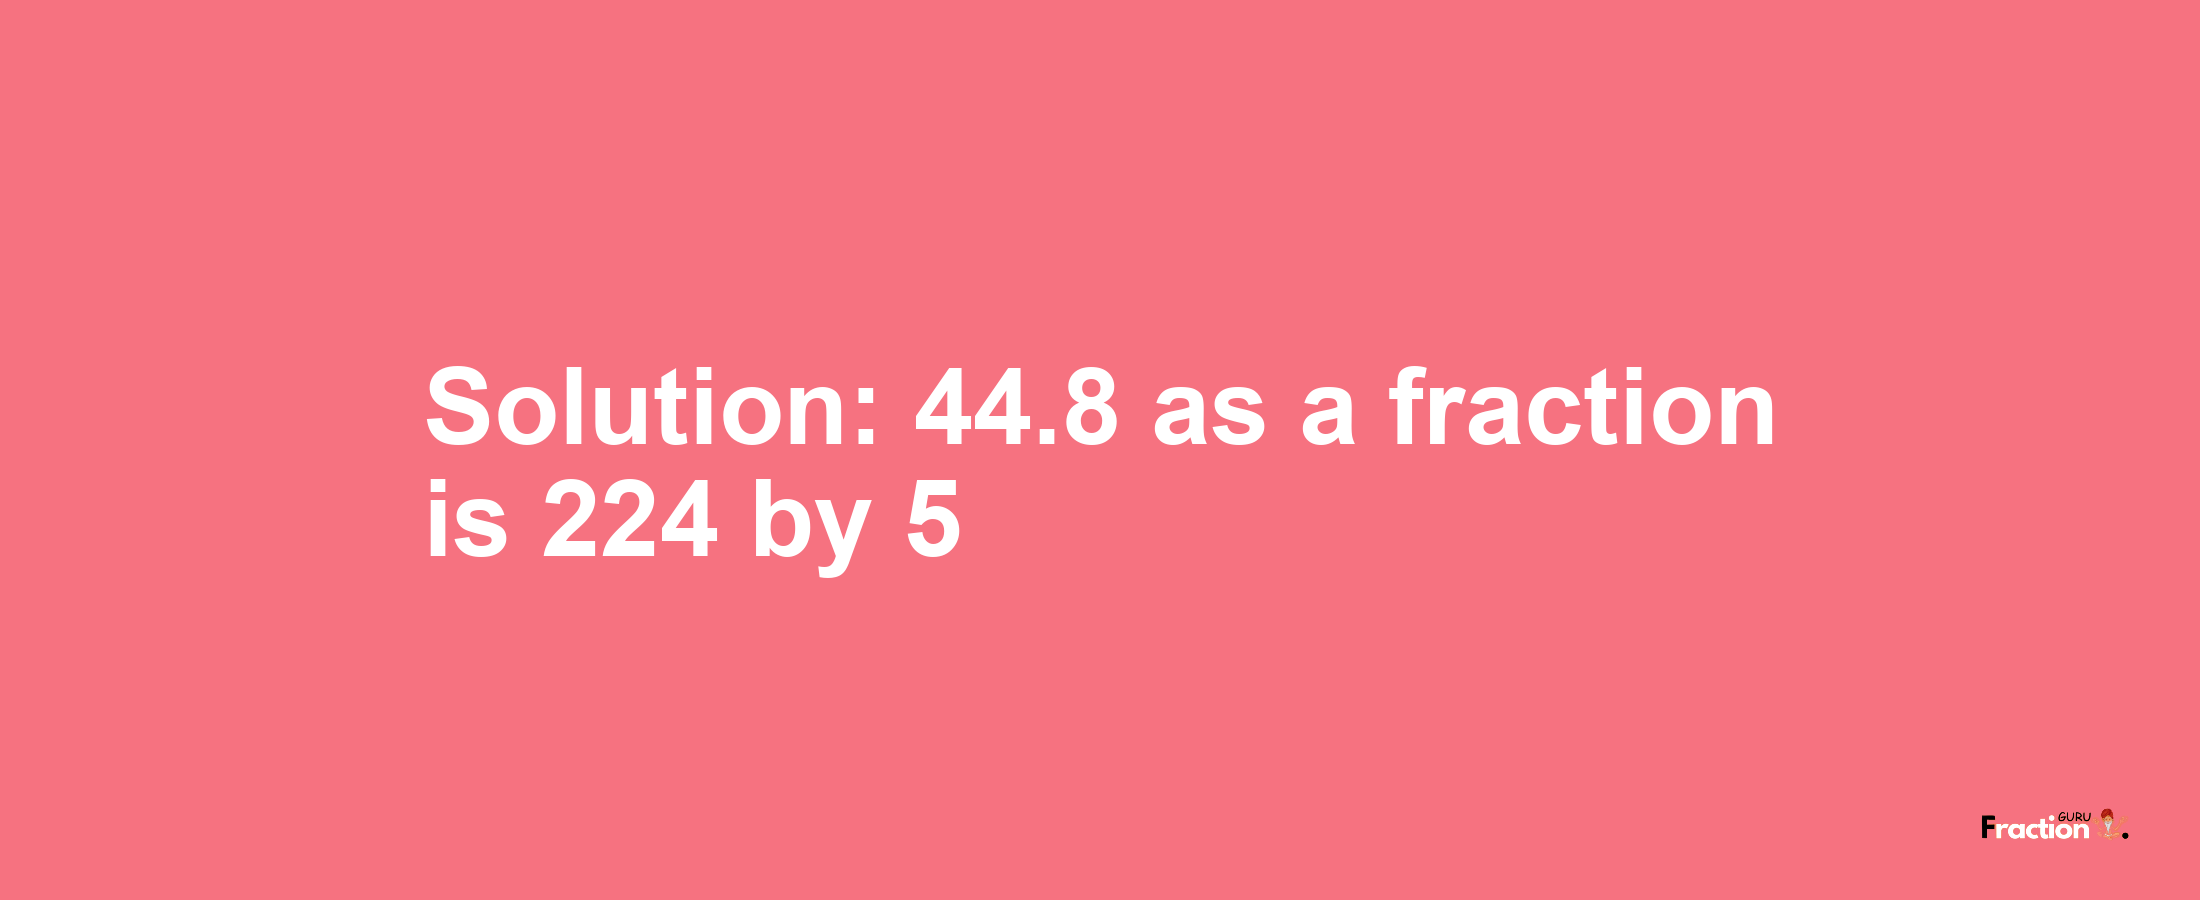 Solution:44.8 as a fraction is 224/5